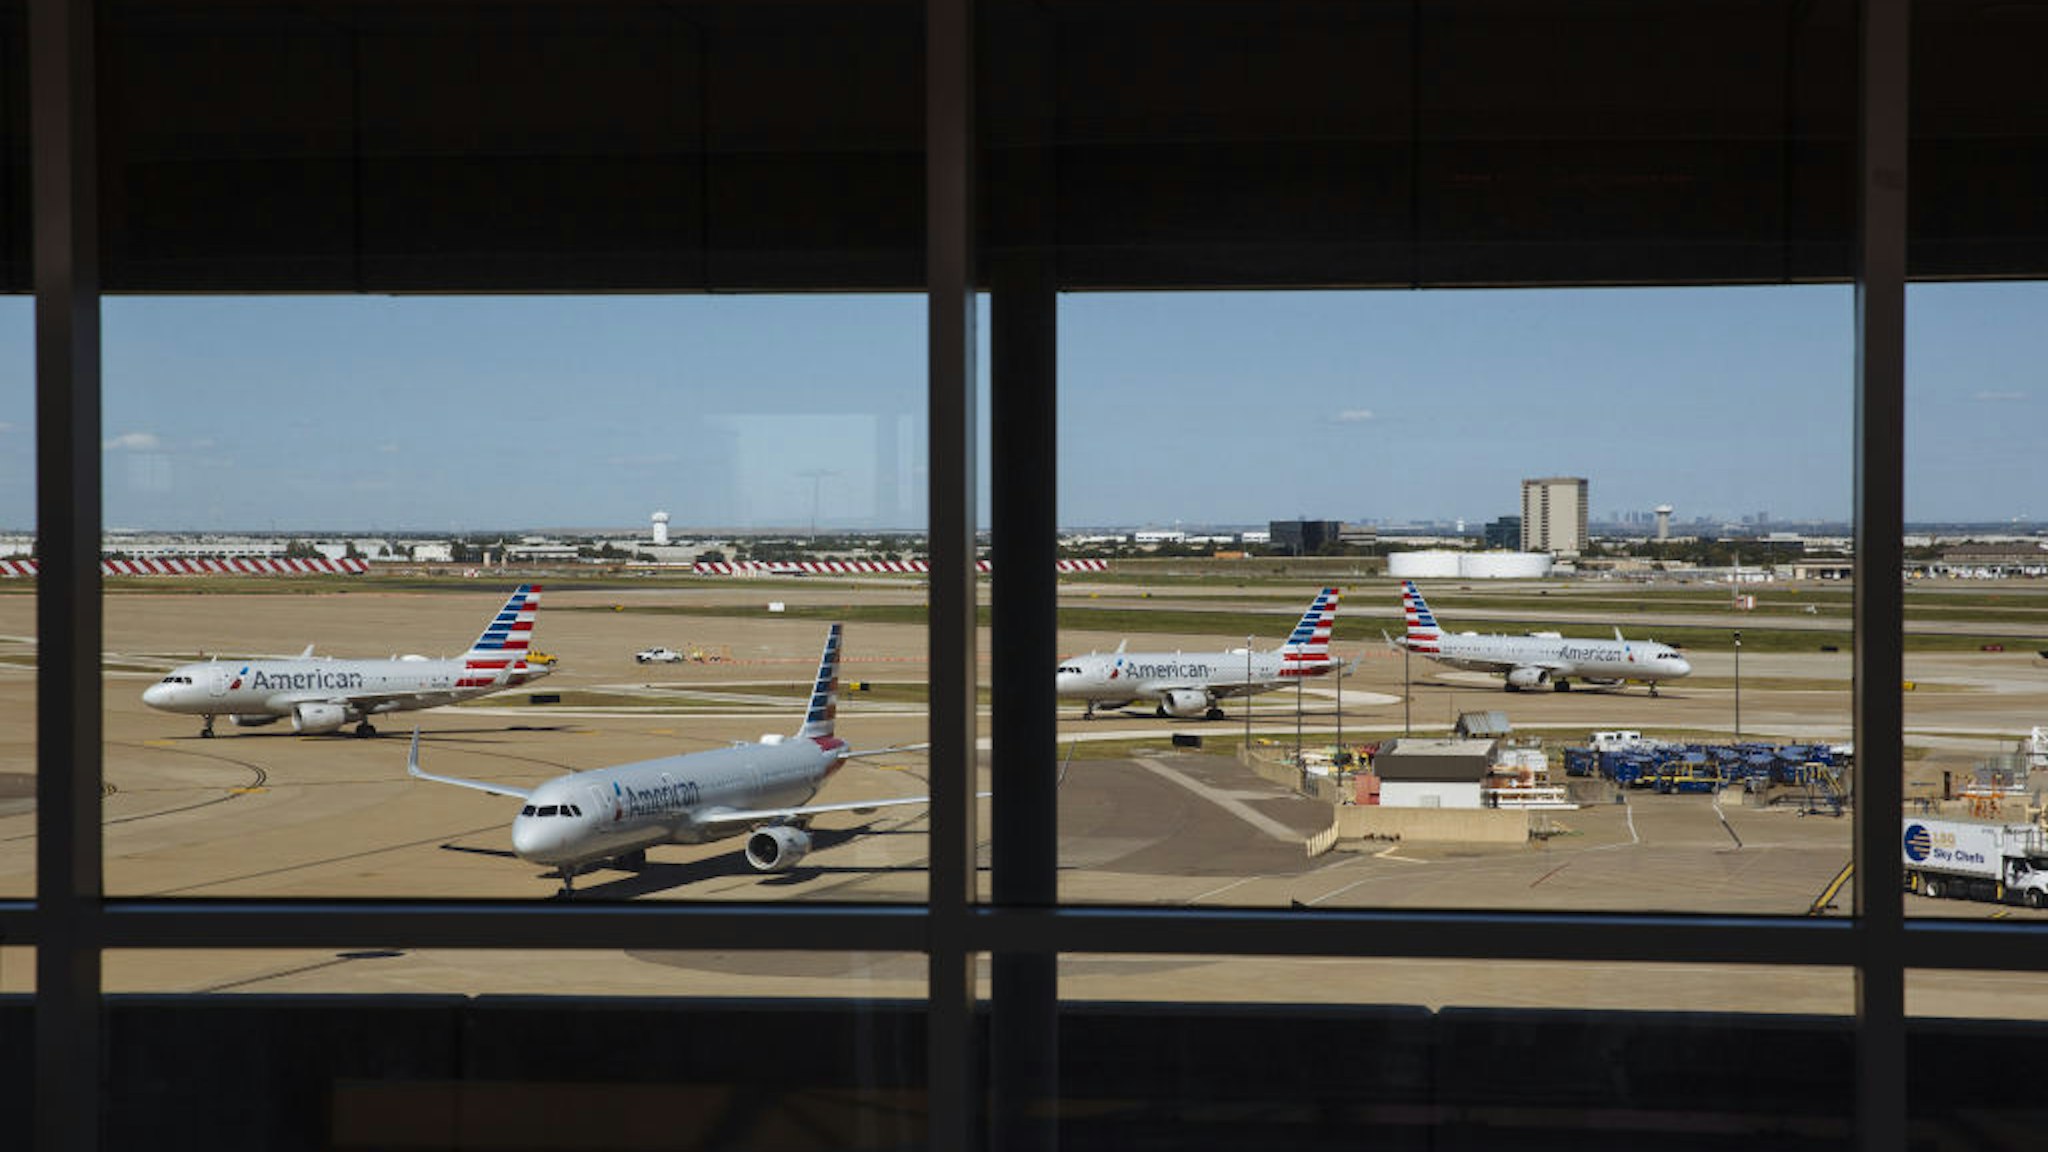 American Airlines planes sit on the tarmac at Dallas/Fort Worth International Airport (DFW) in Dallas, Texas, U.S., on Monday, Sept. 28, 2020. Airline passenger numbers in the U.S. totaled 797,699 on Sept. 28, compared with 2.37 million the same weekday a year earlier, according to the Transportation Security Administration.